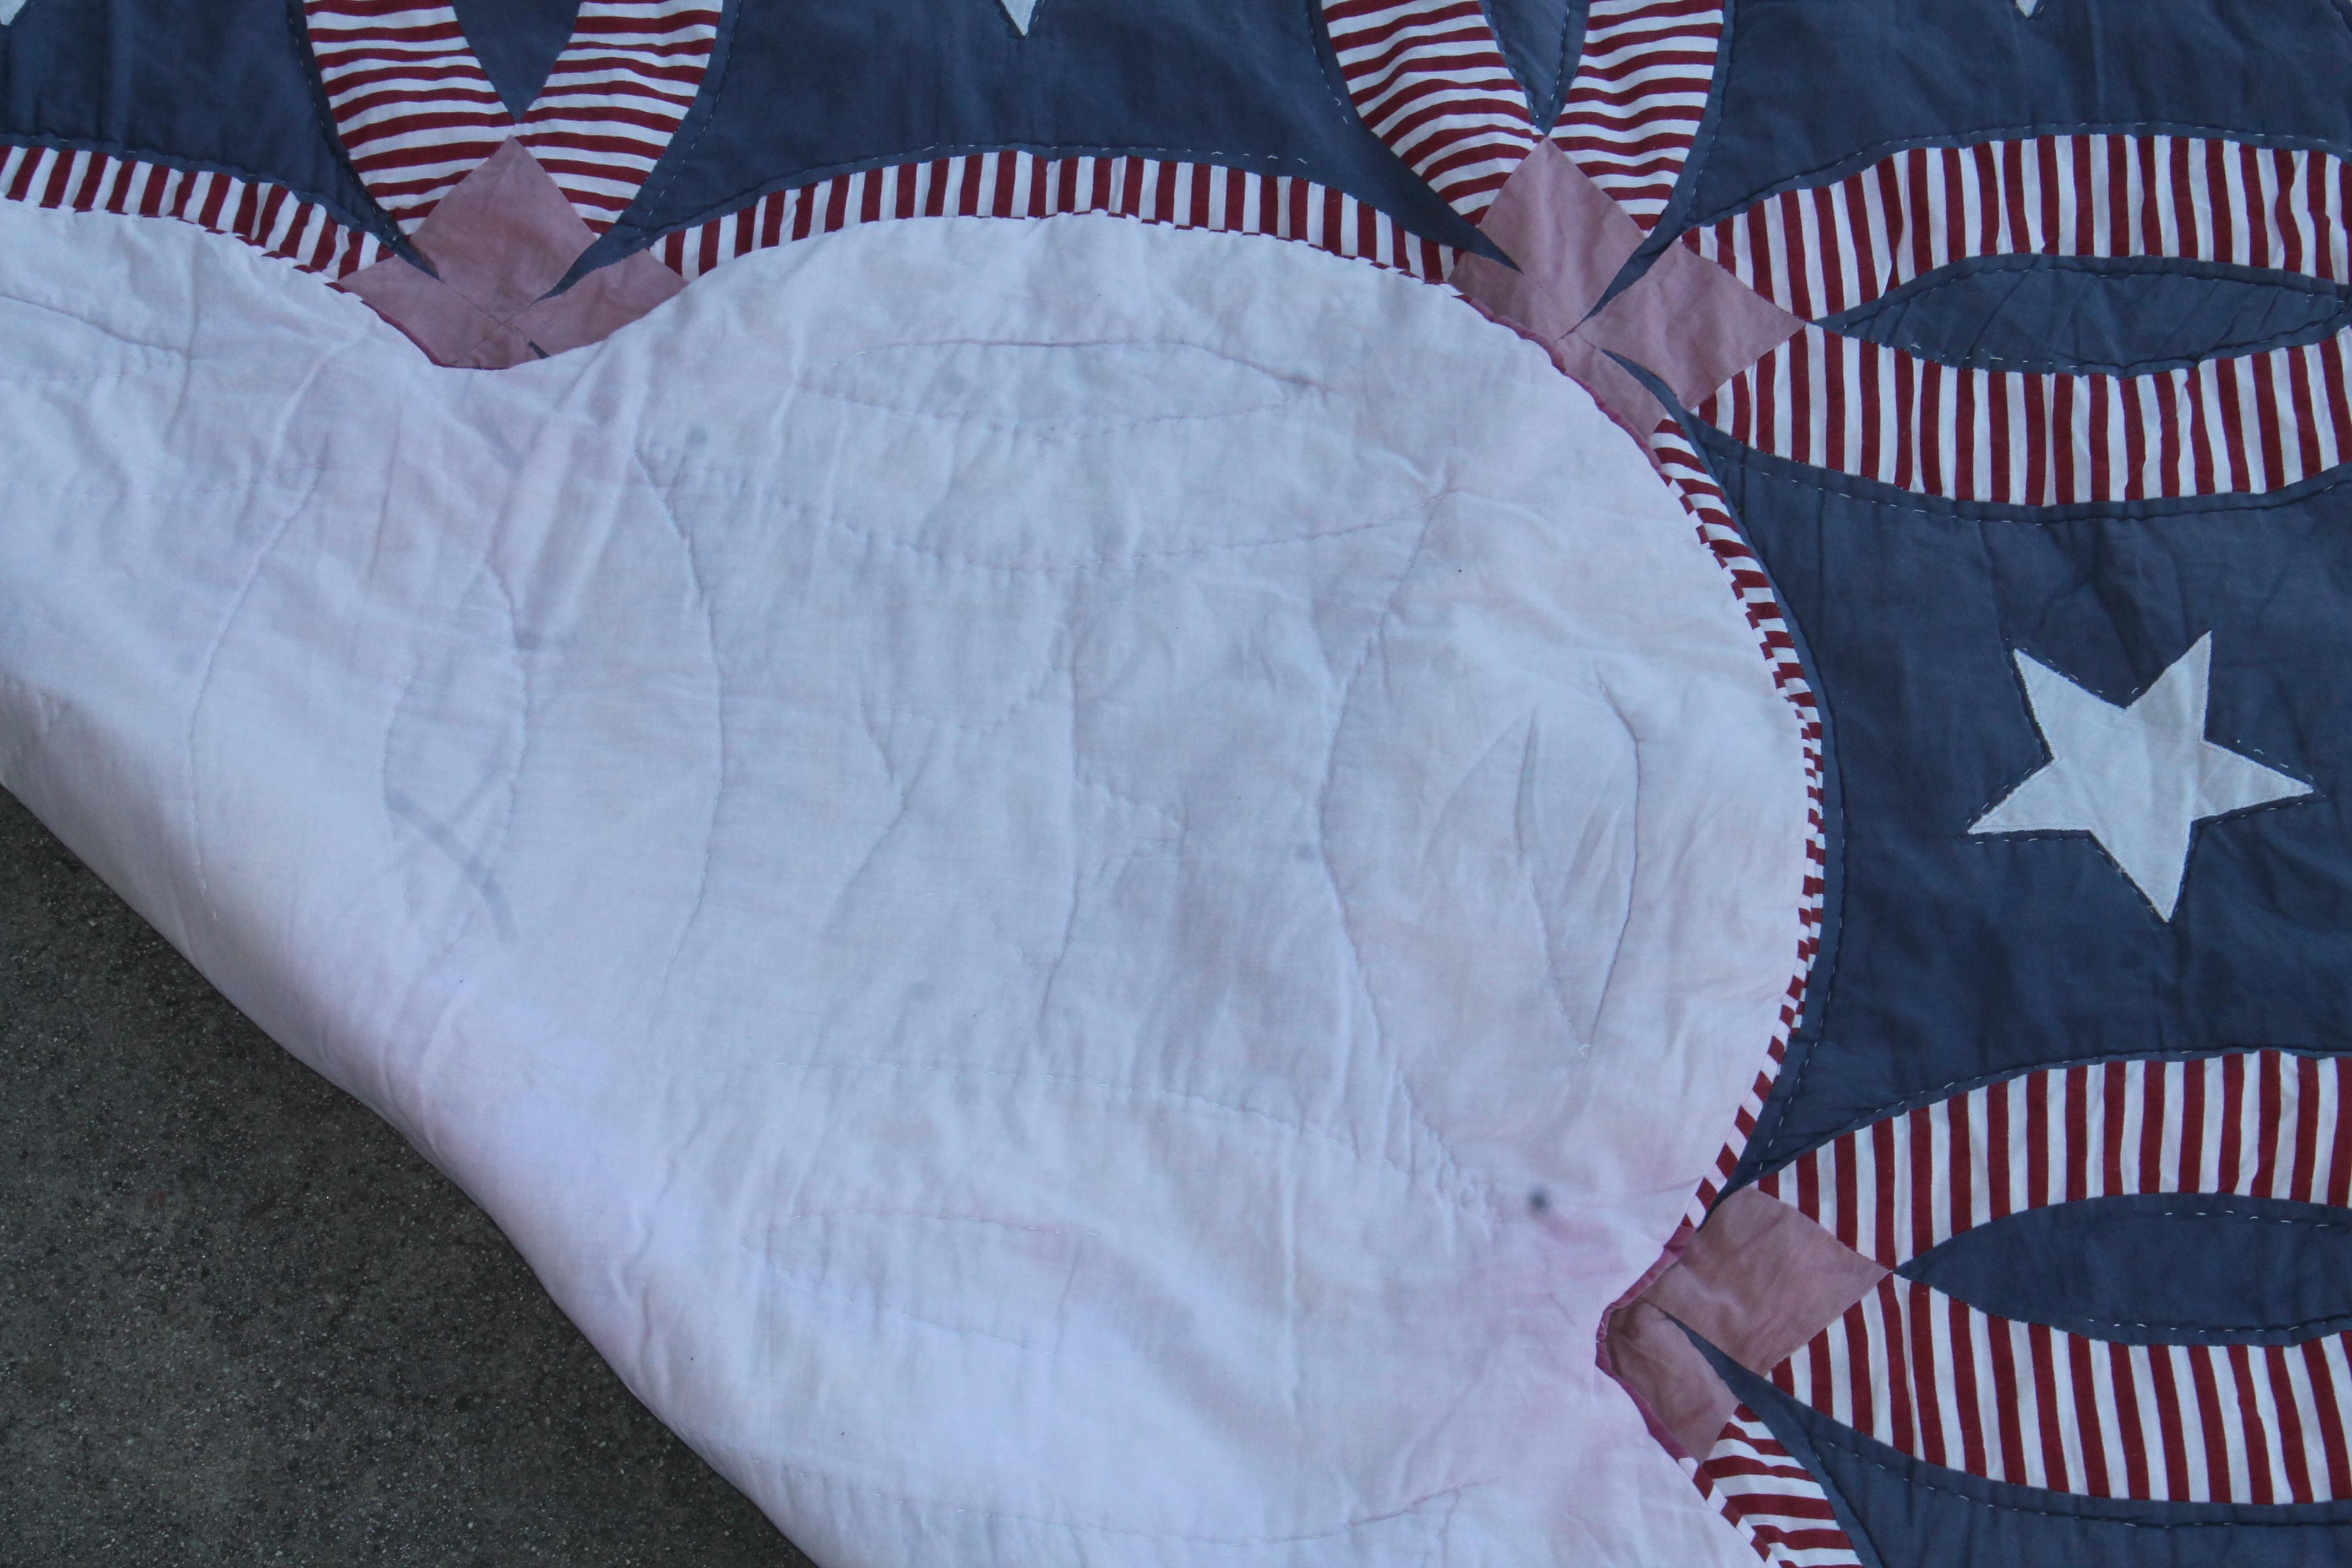 This fun and folky patriotic wedding ring quilt with a overall fade throughout. The condition is very good with no damage.